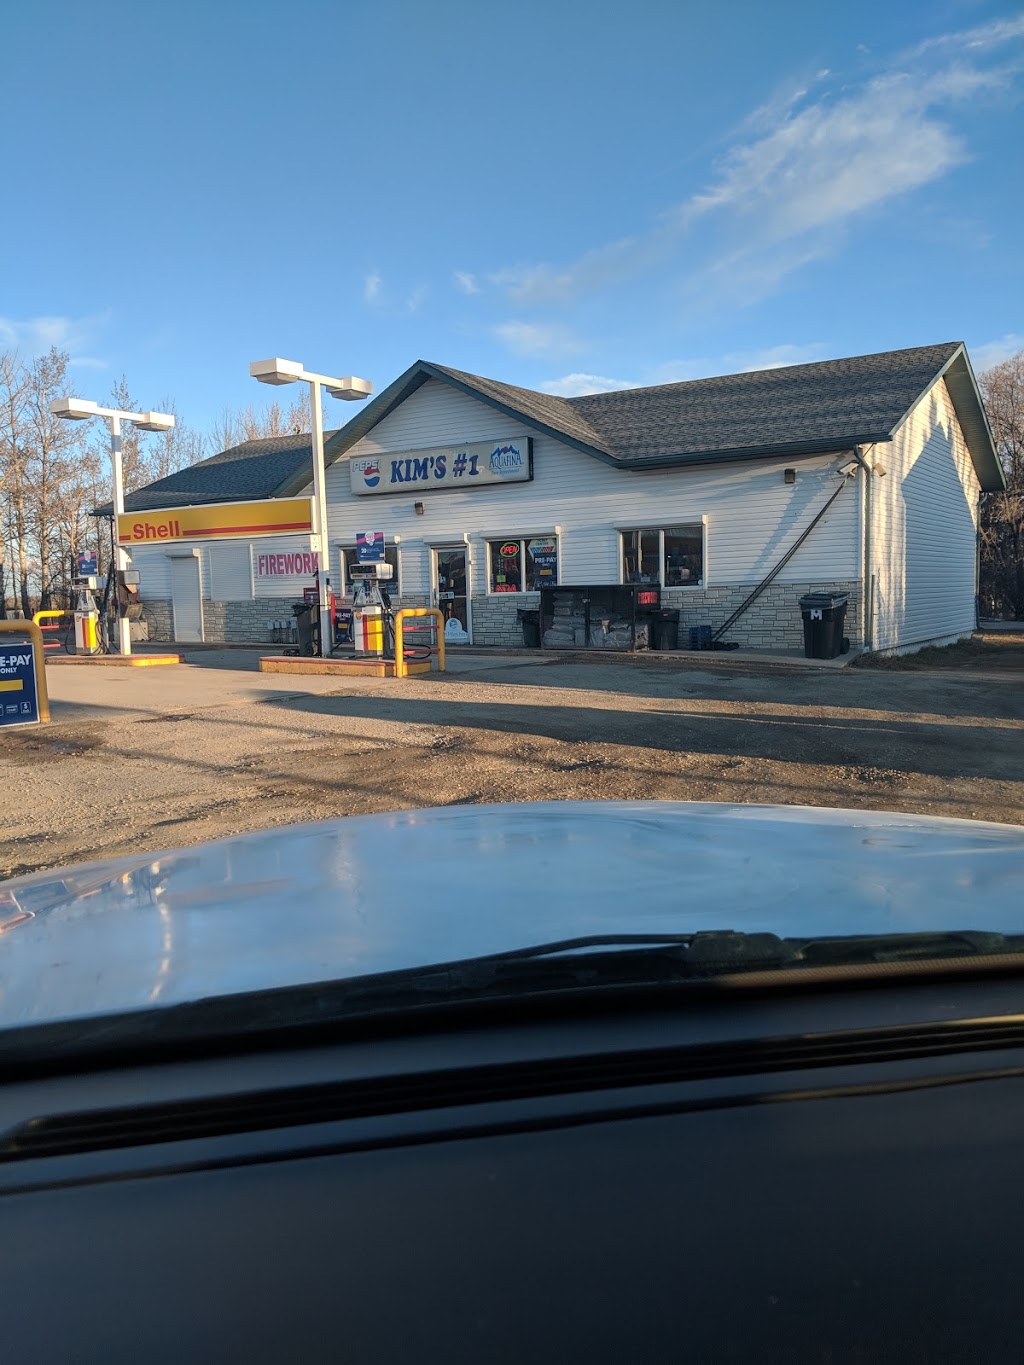 Kims No 1 Shell Station | gas station | Yellowhead Highway 16 and, Range Rd 32, Duffield, AB T0E 0N0, Canada | 7808922591 OR +1 780-892-2591